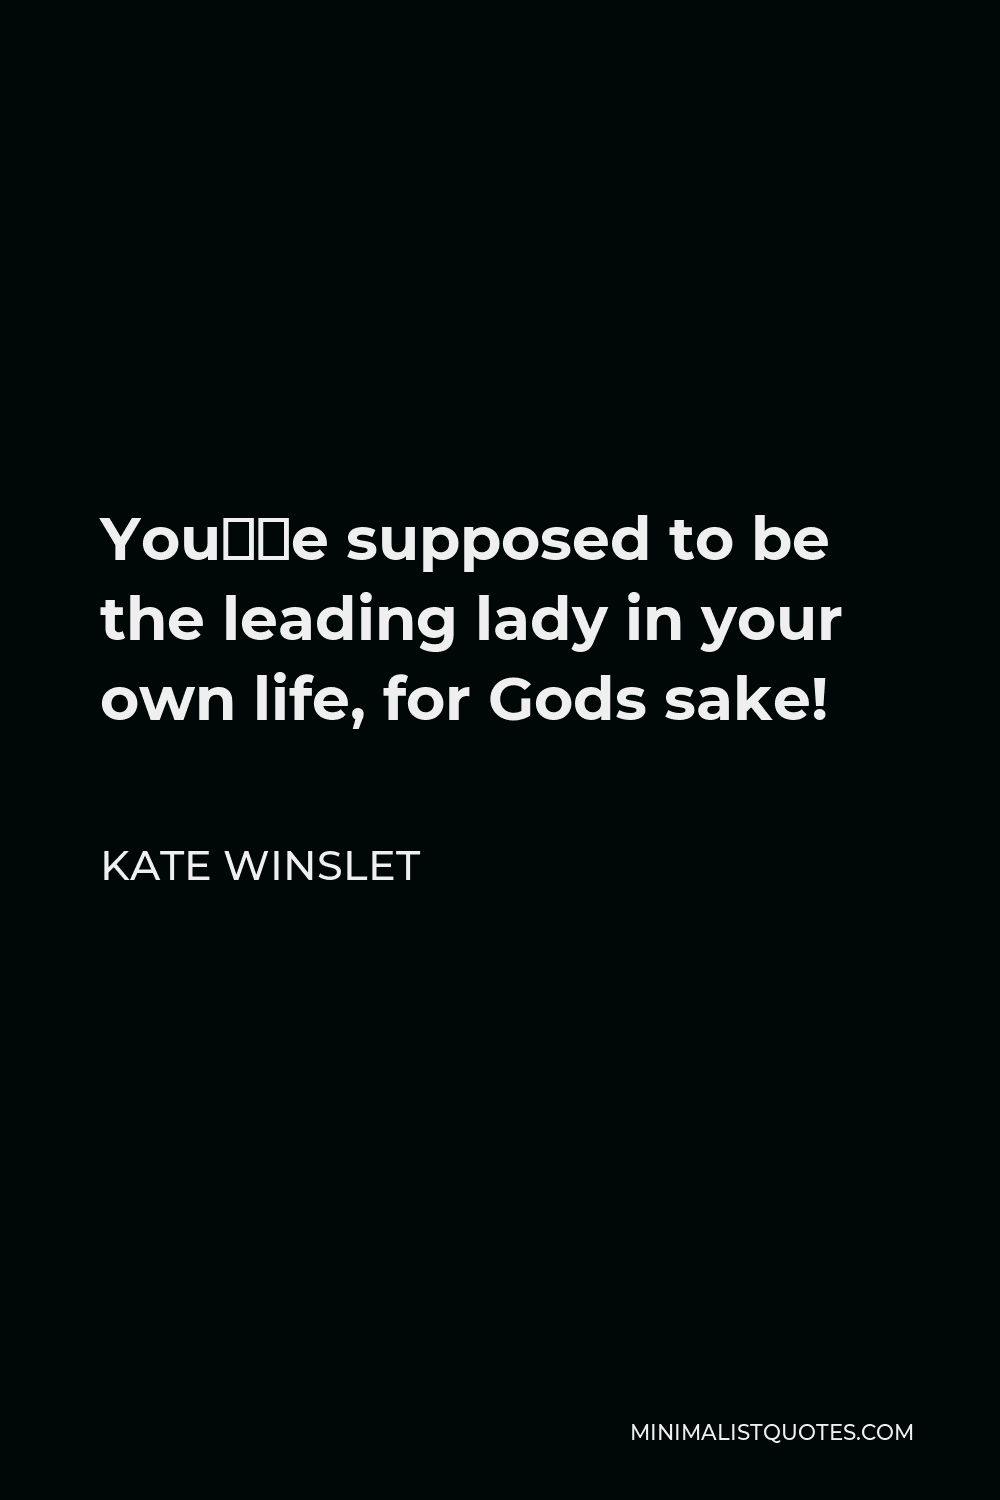 Kate Winslet Quote - You’re supposed to be the leading lady in your own life, for Gods sake!